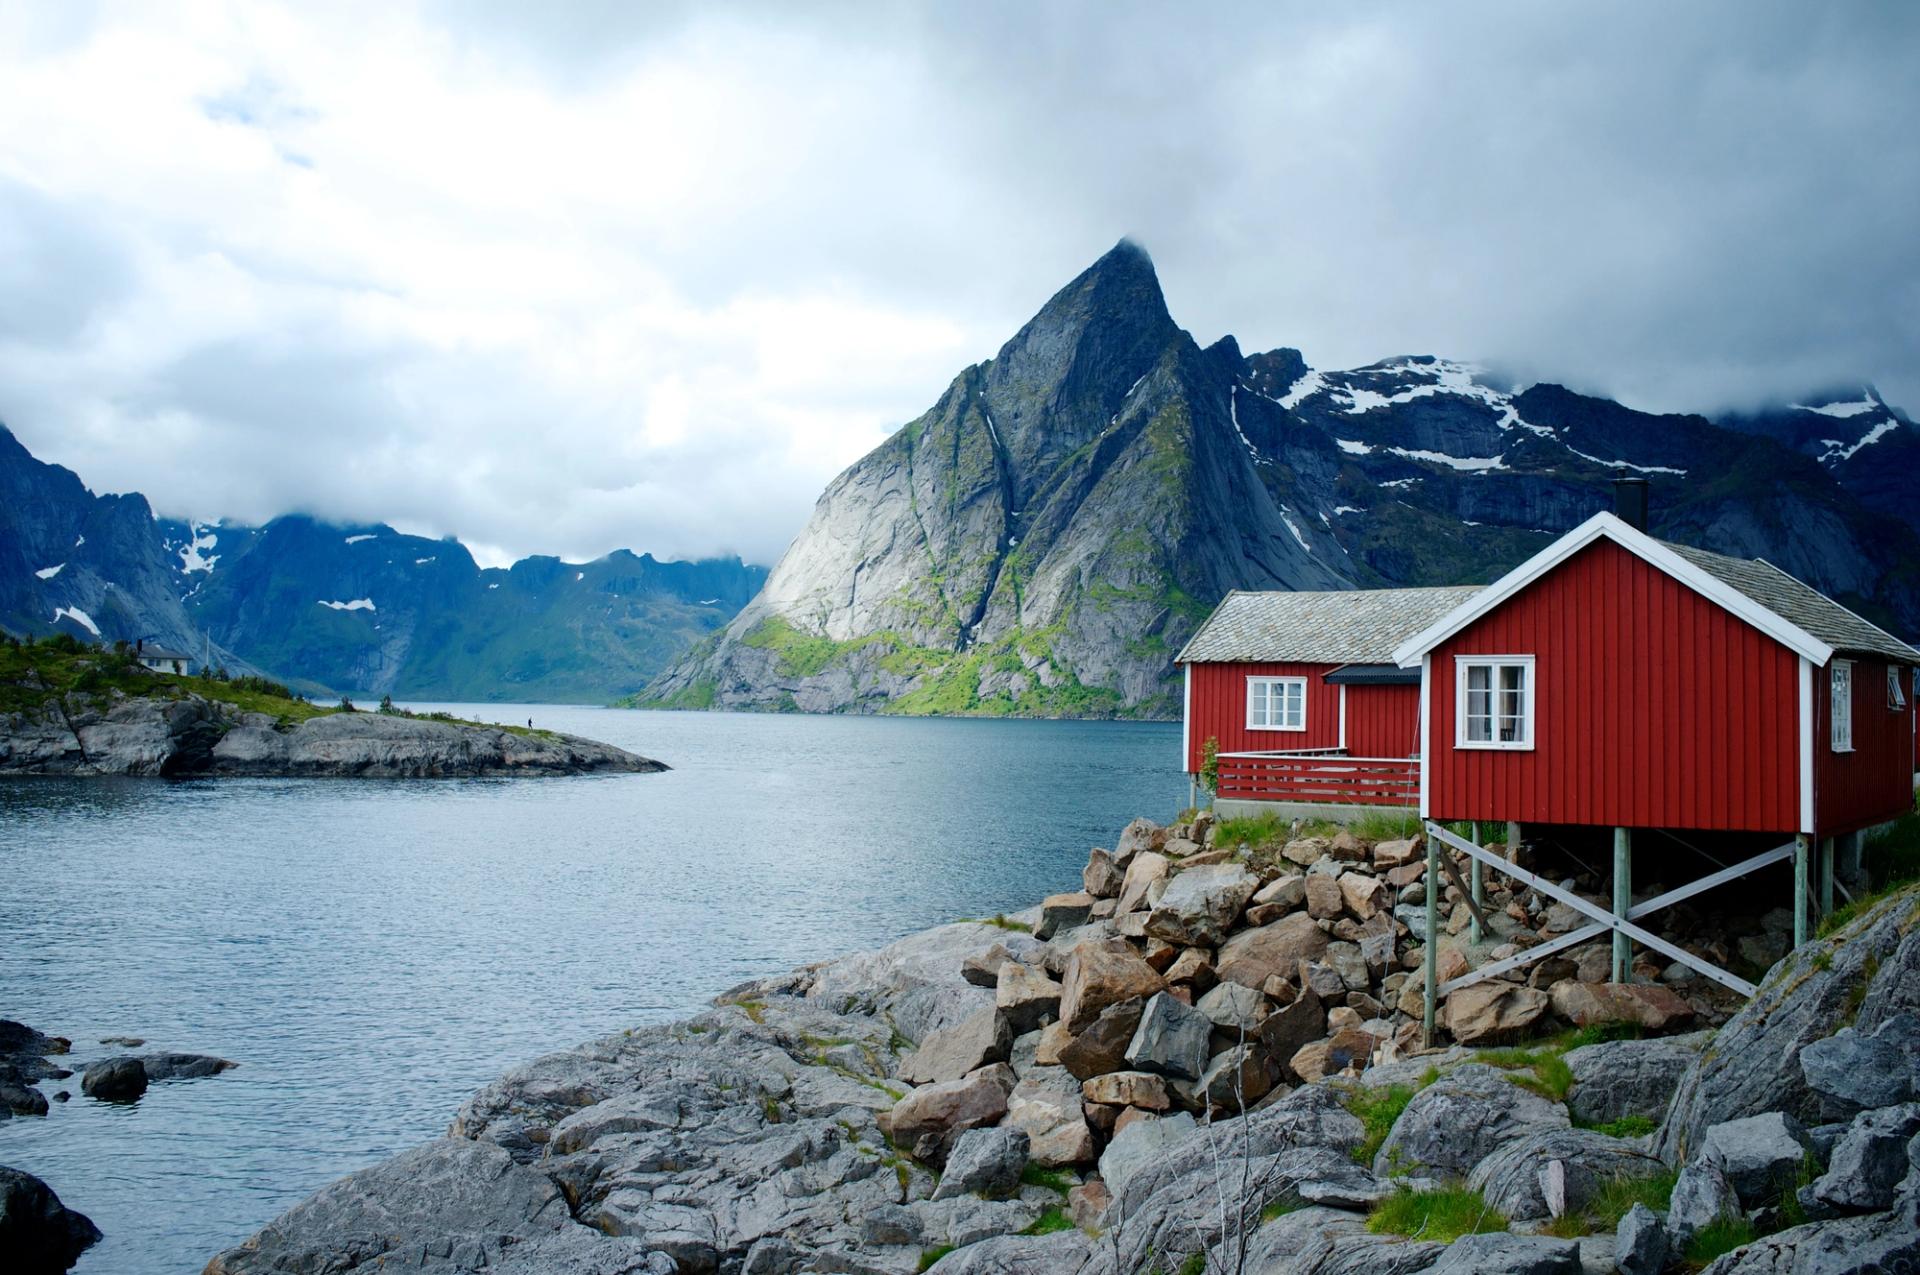 A small red cabin along side a fjord with mountains in the background